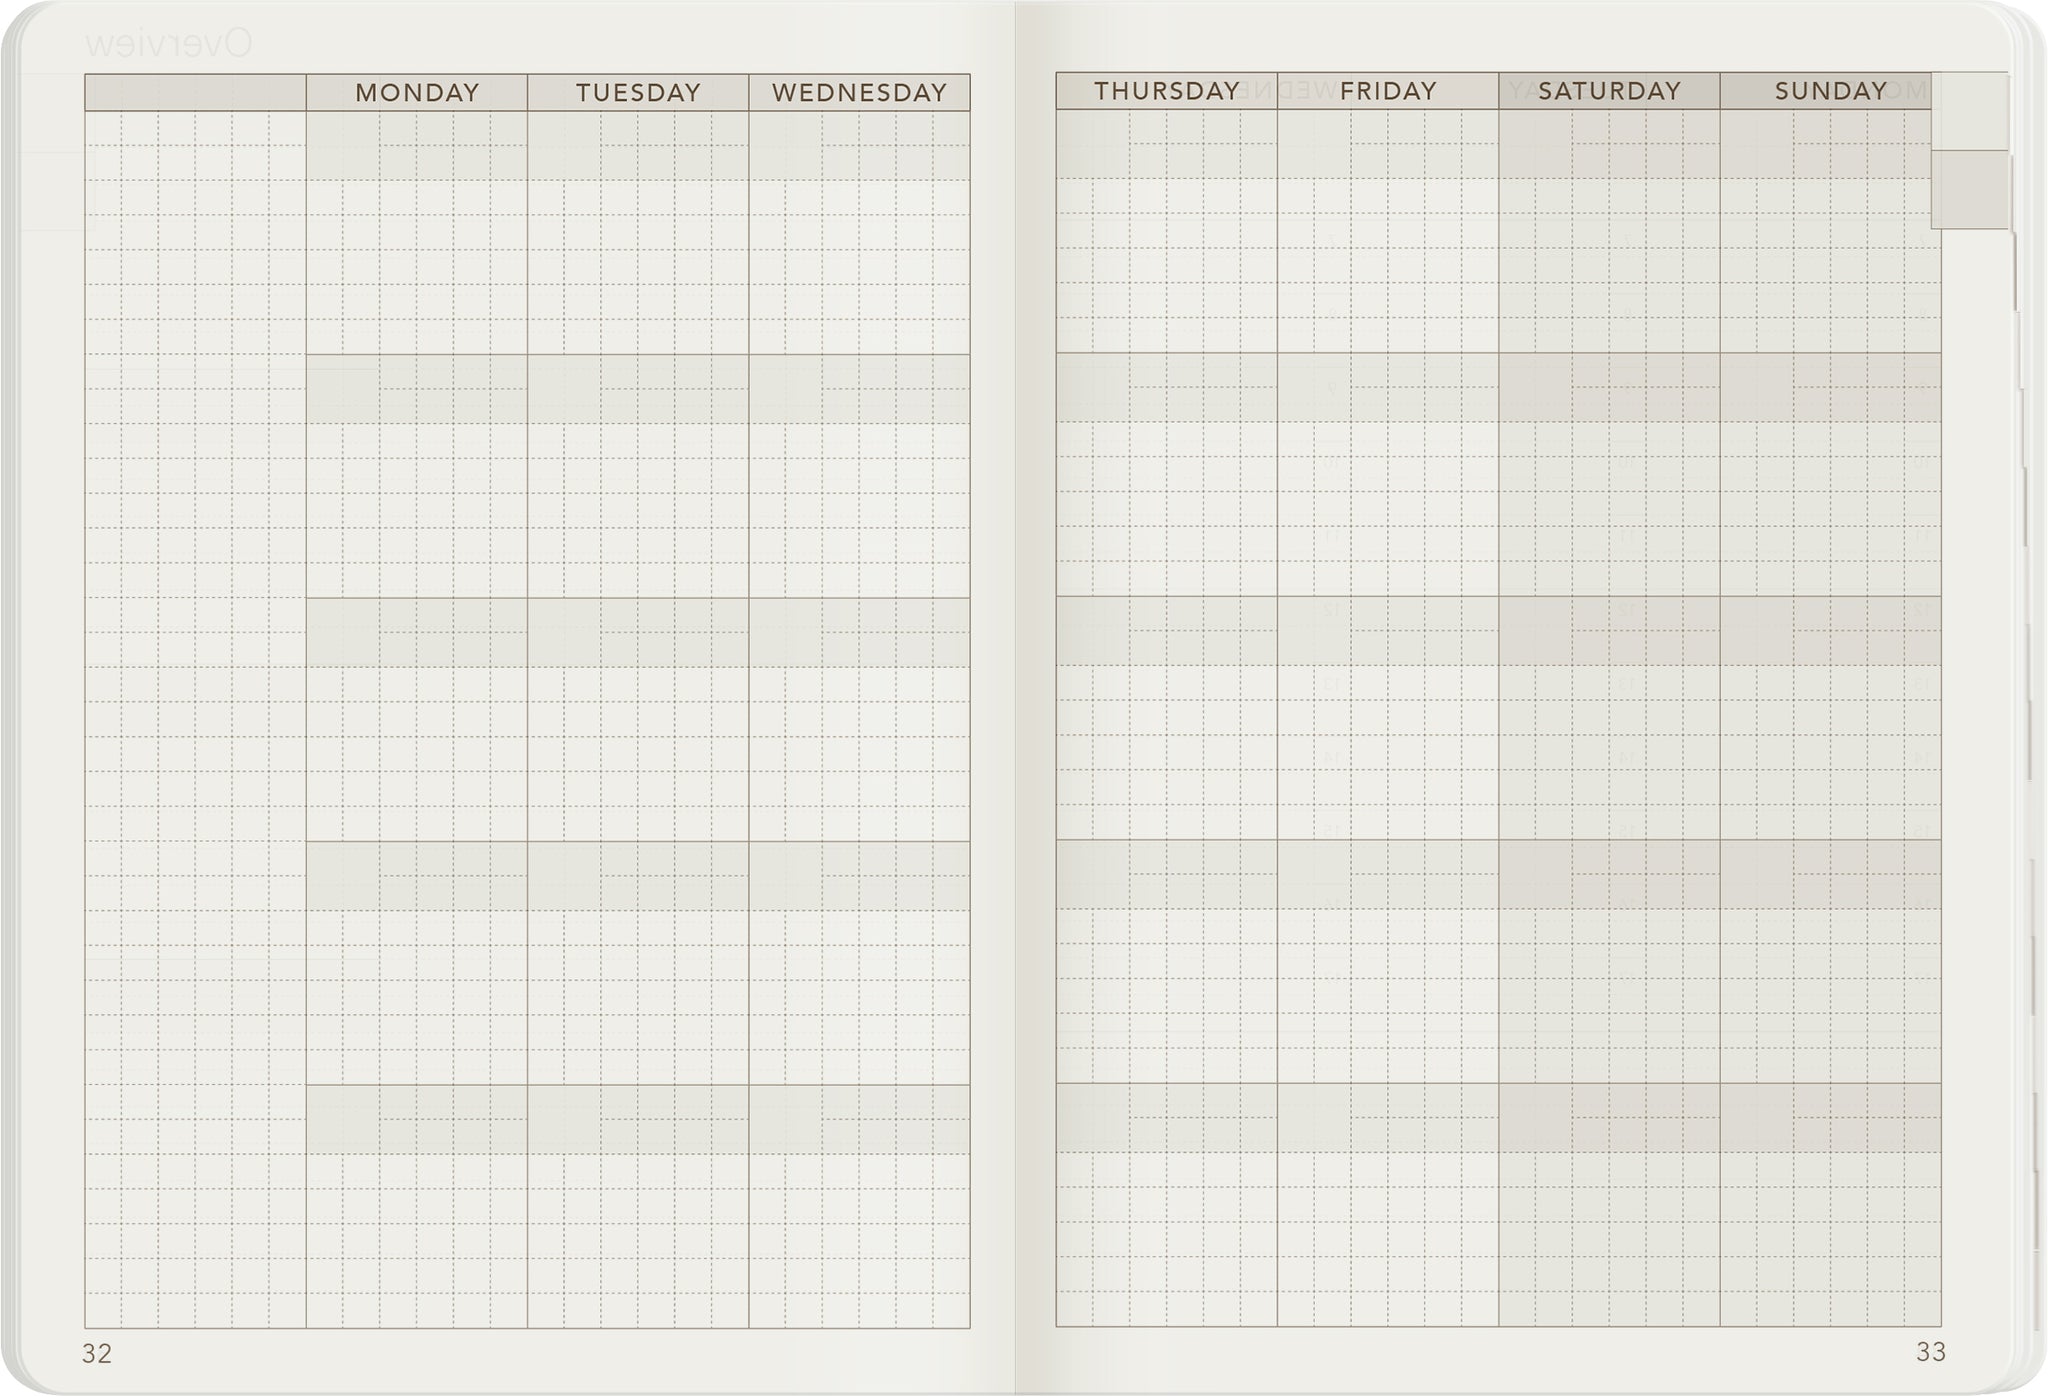 A6 Undated Weekly Planner - 2022 Edition